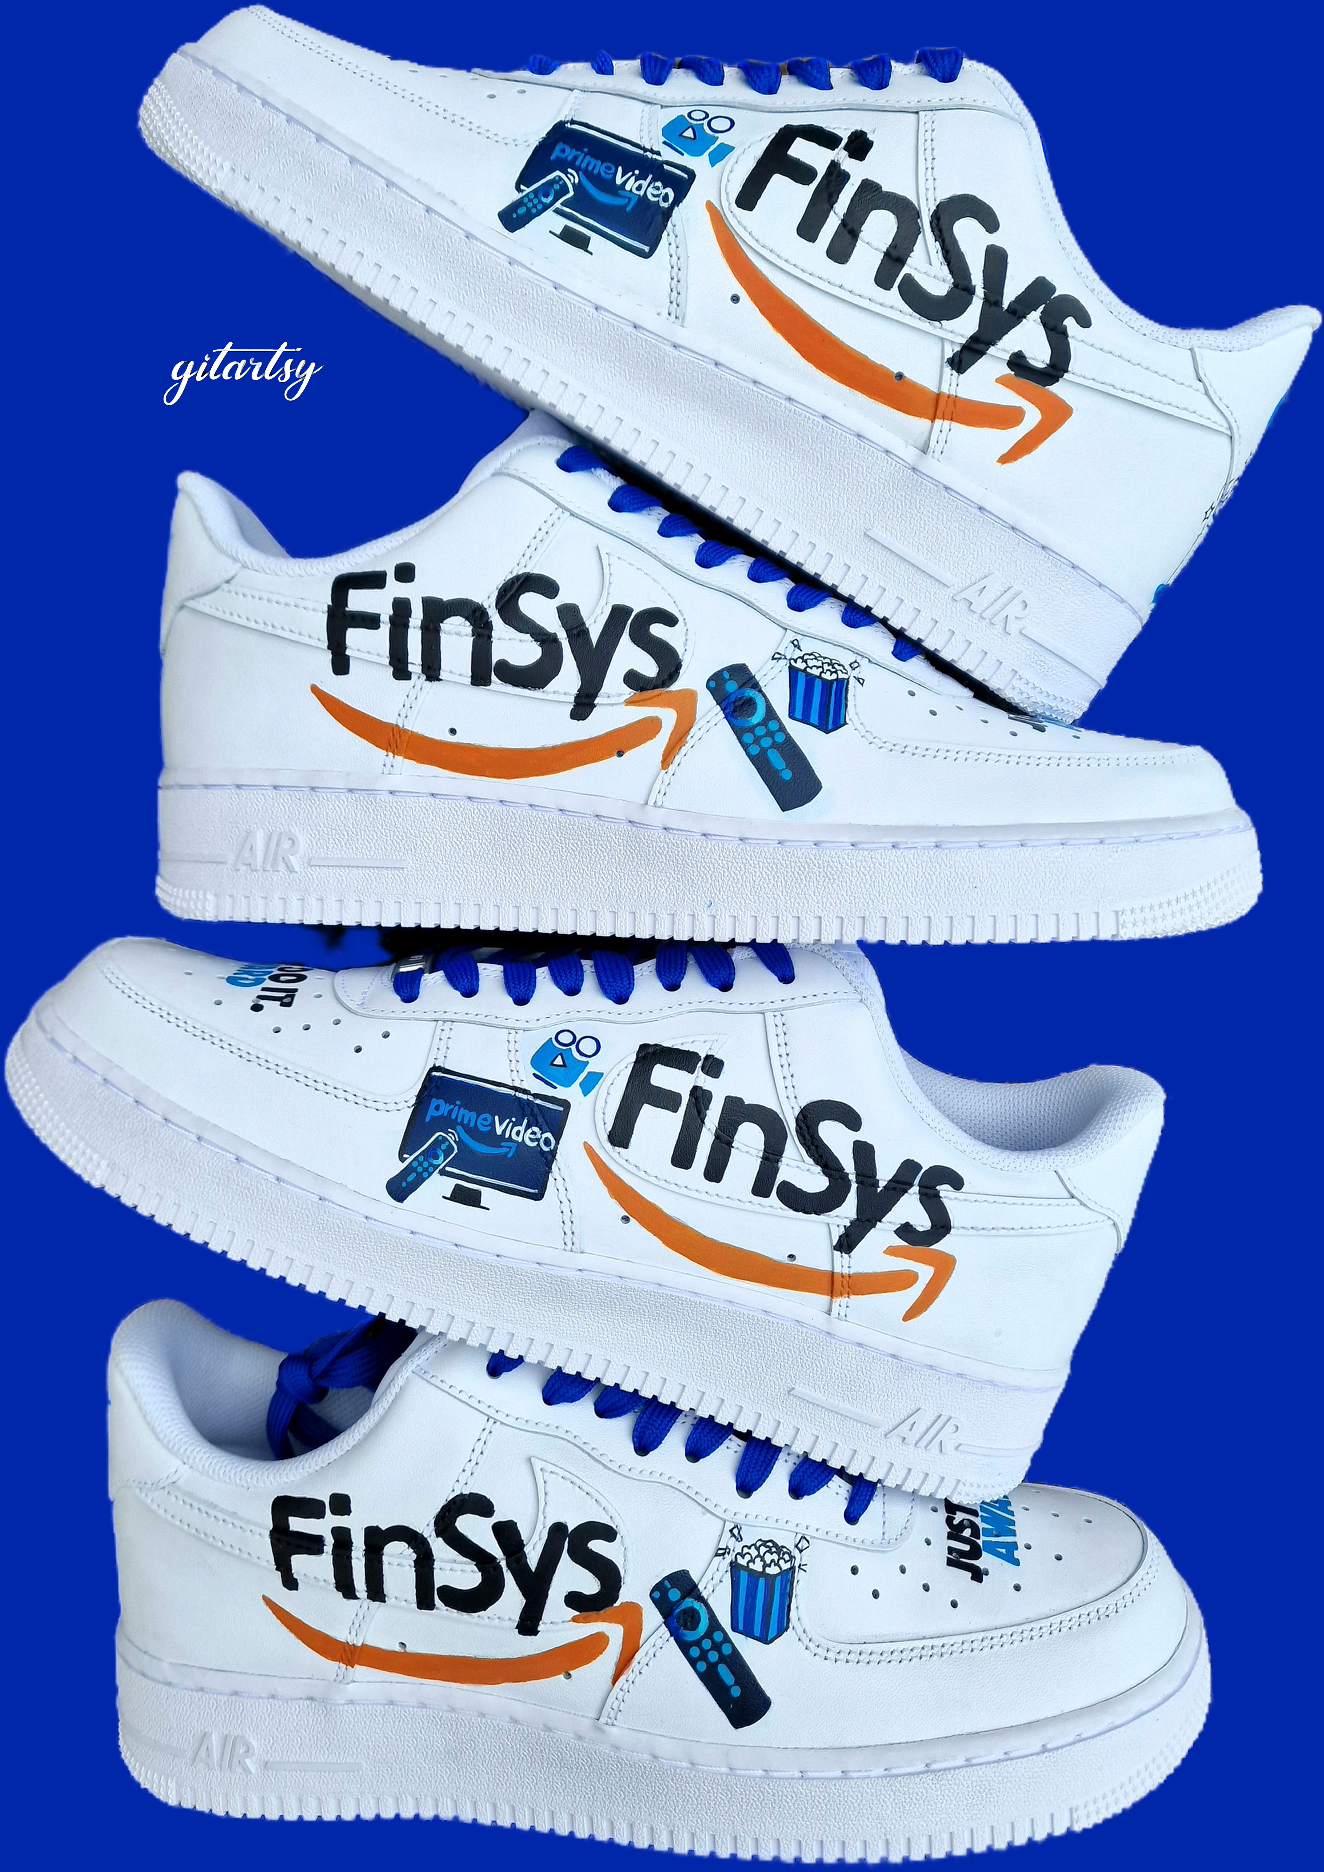 Custom Nike AF1s painted for company 'Finsys' inspired by Amazon Prime 